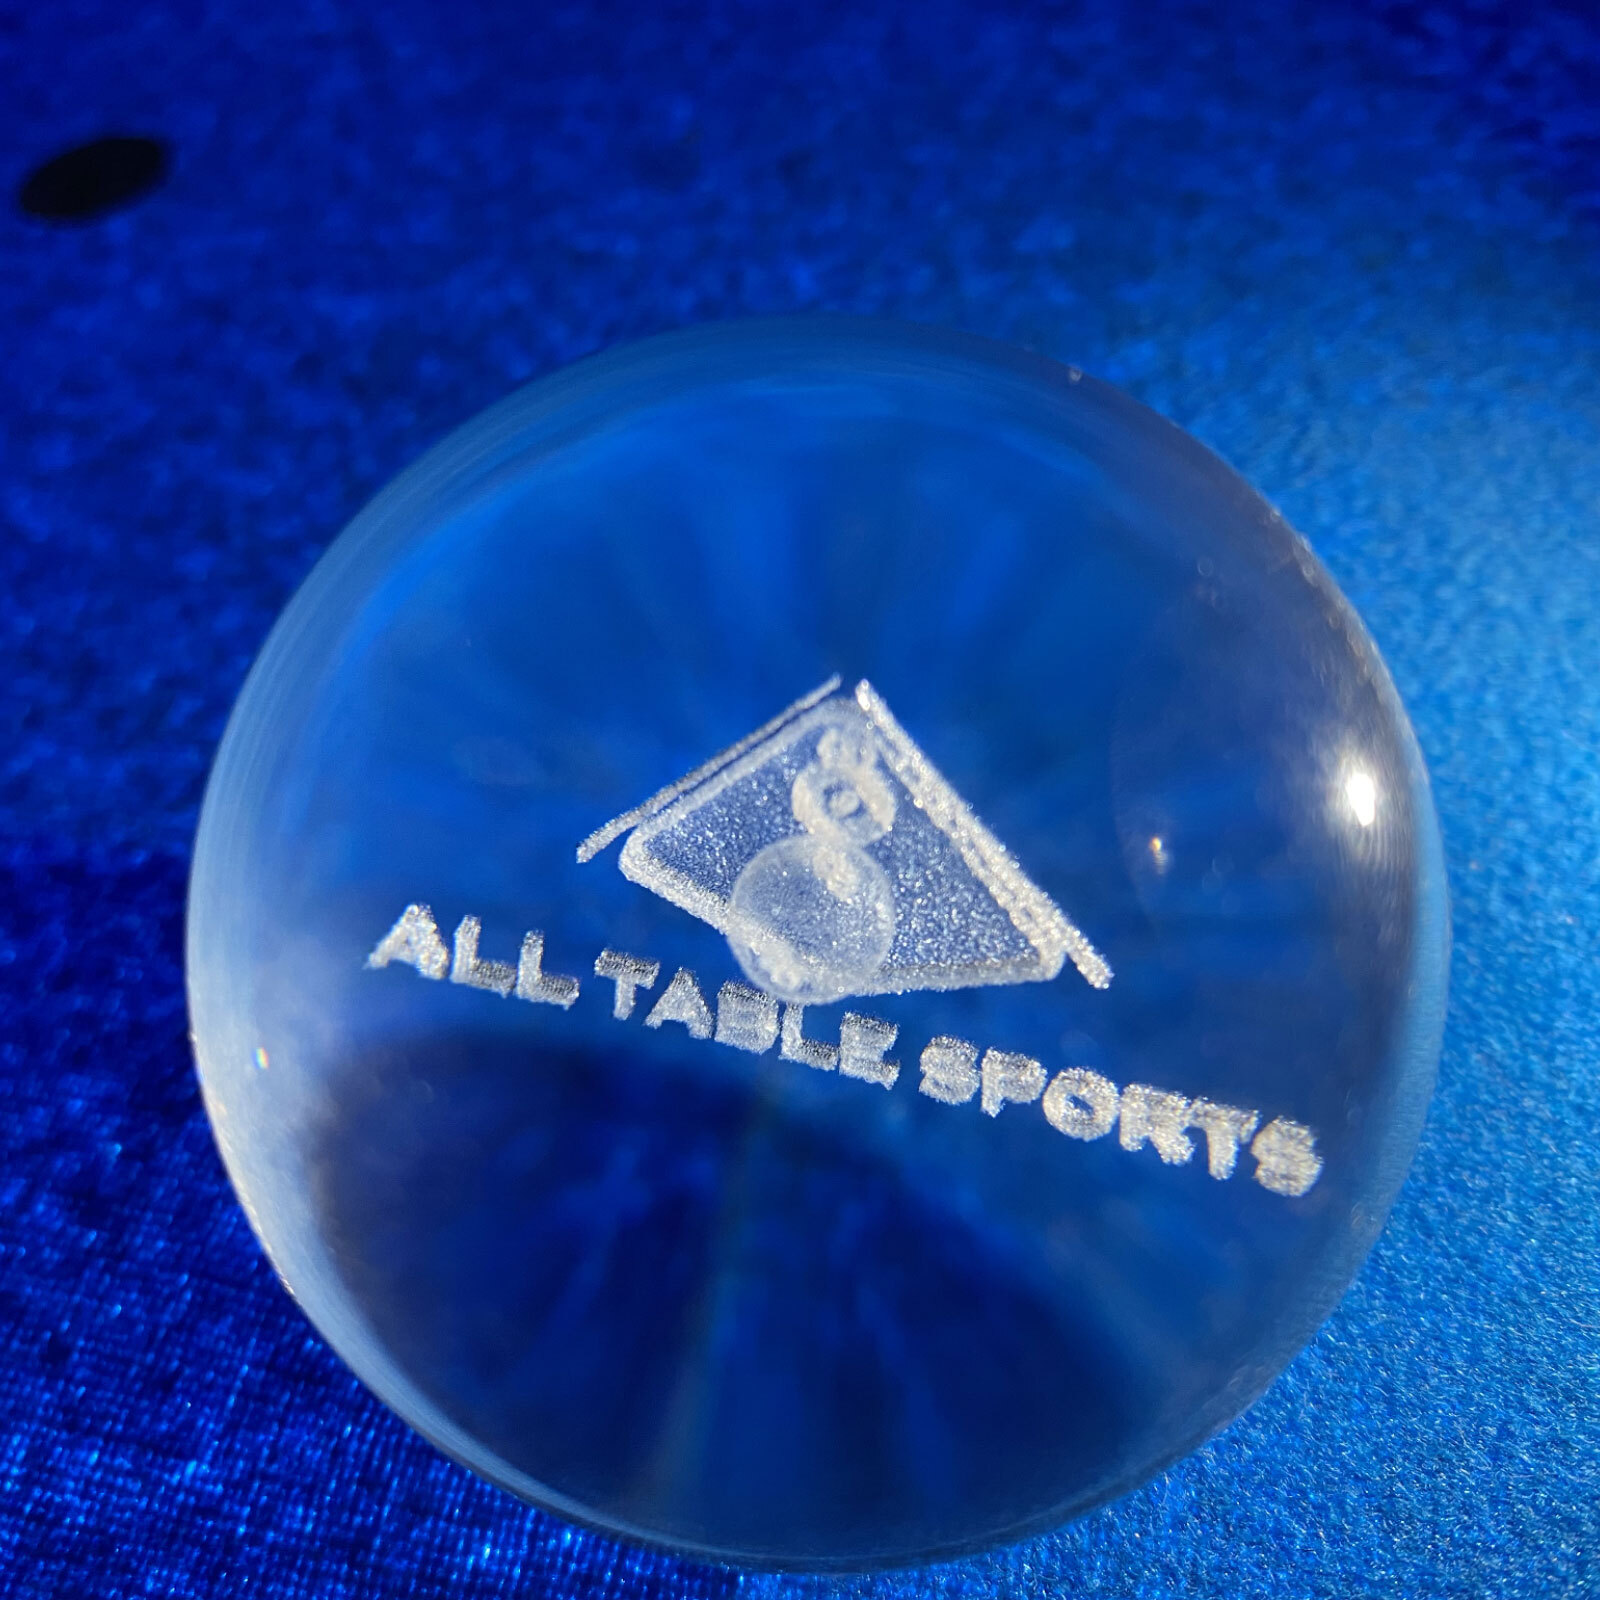 Crystal Pool Ball 2 inch (Decoration Only, not for play)